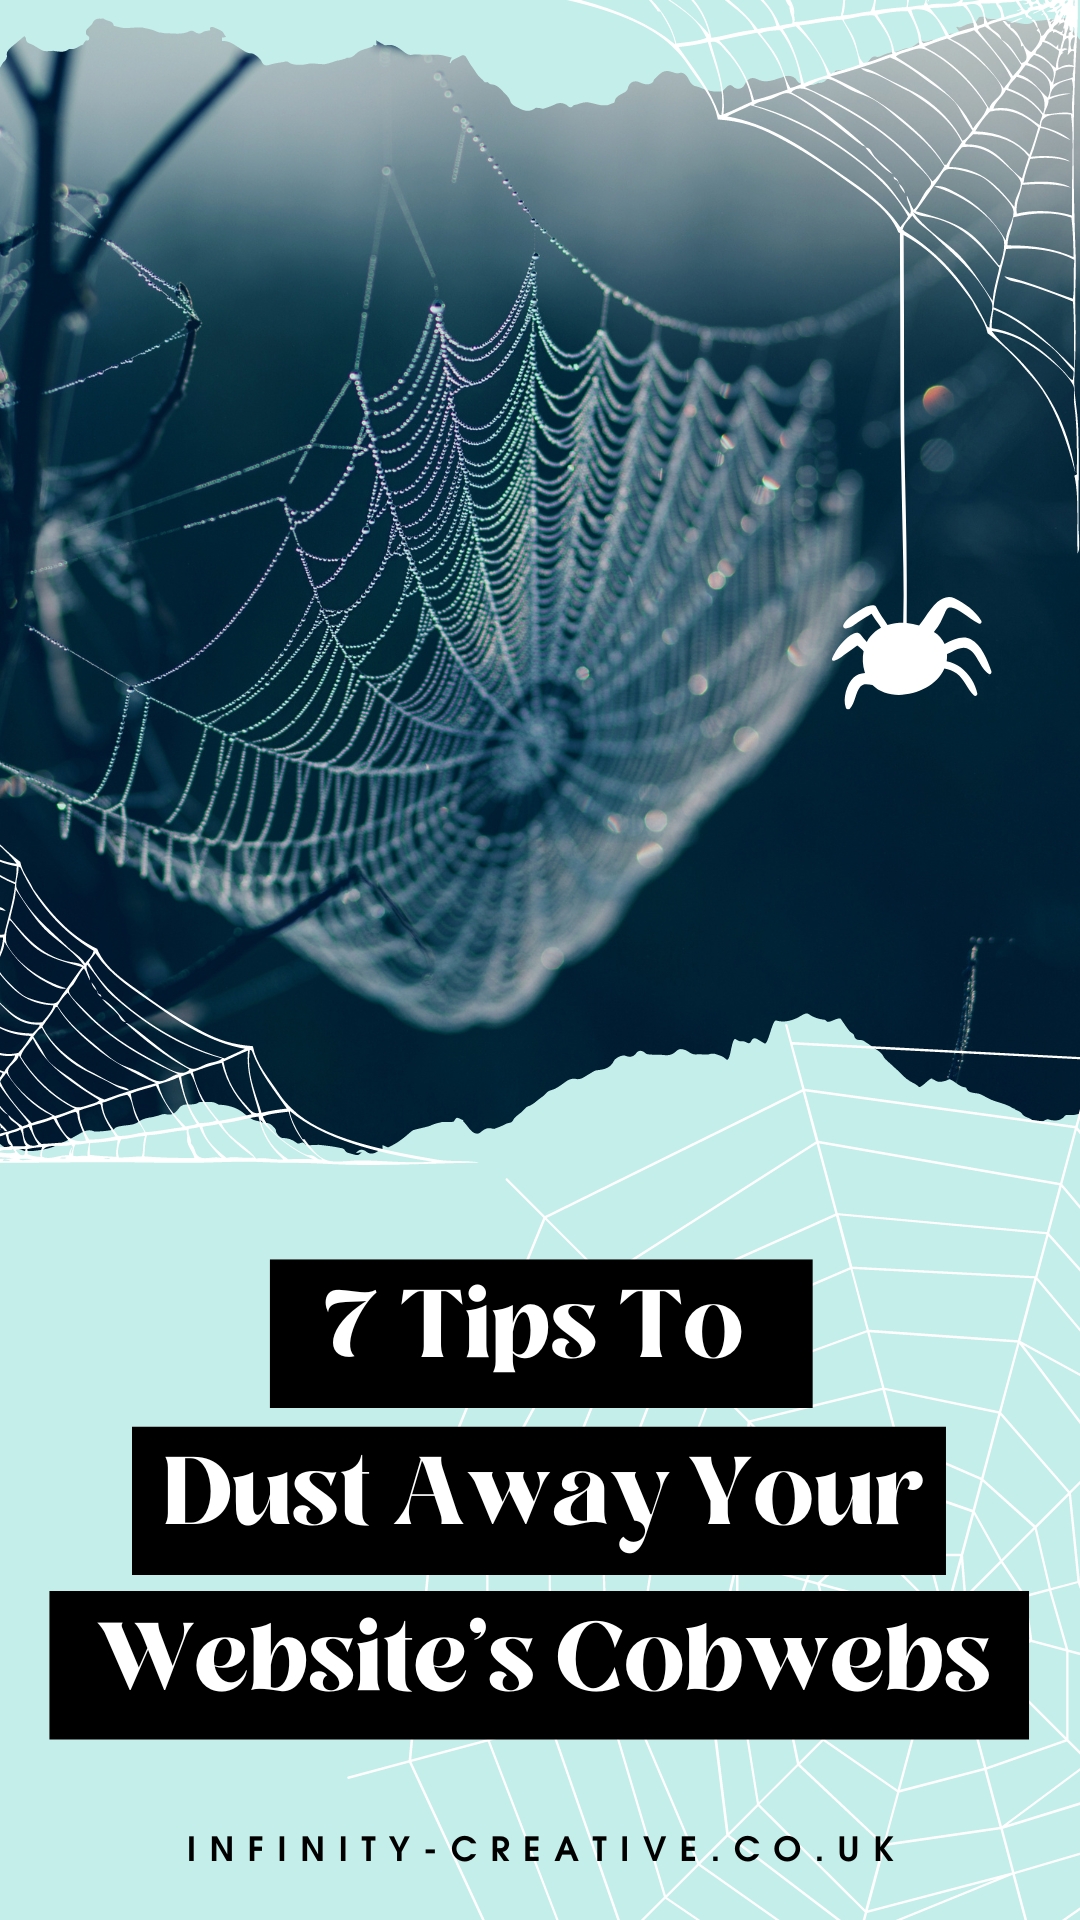 7 Tips To Dust Away Your Website’s Cobwebs